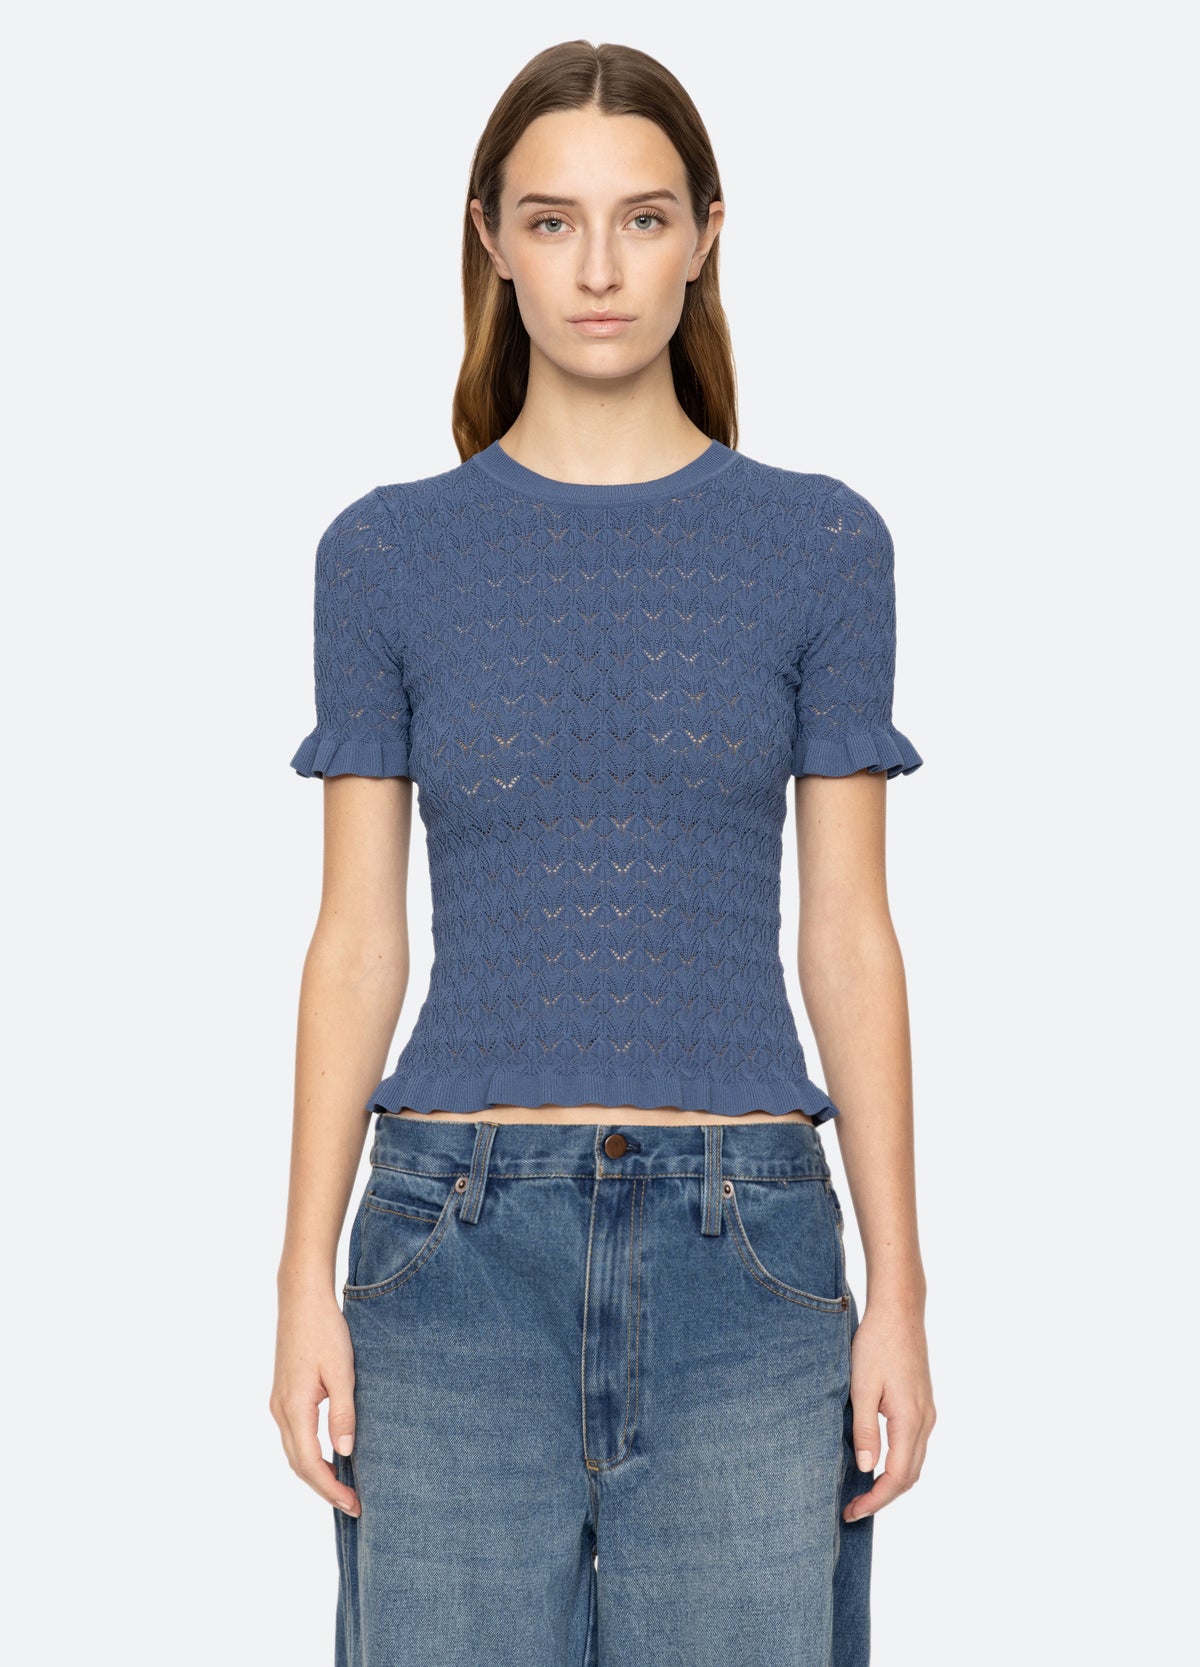 blue-rue s/s sweater-front view - 18